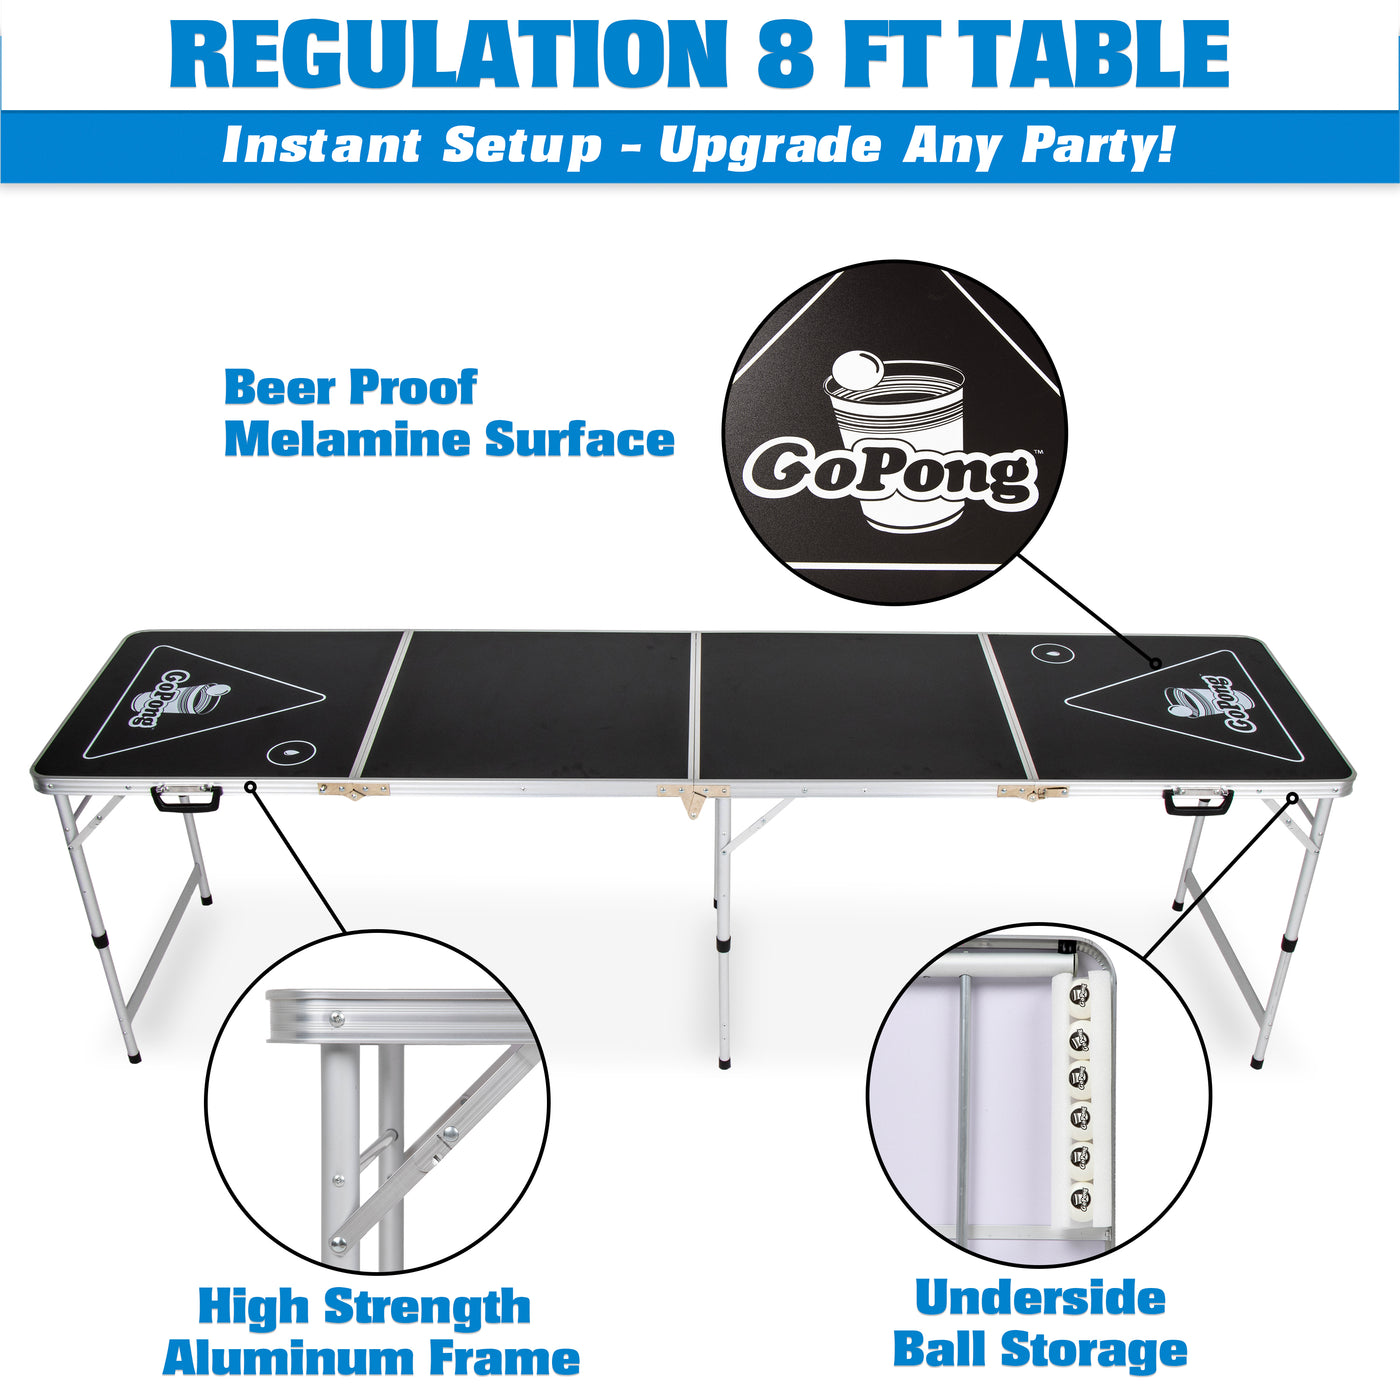 6 Foot Portable Beer Pong Table